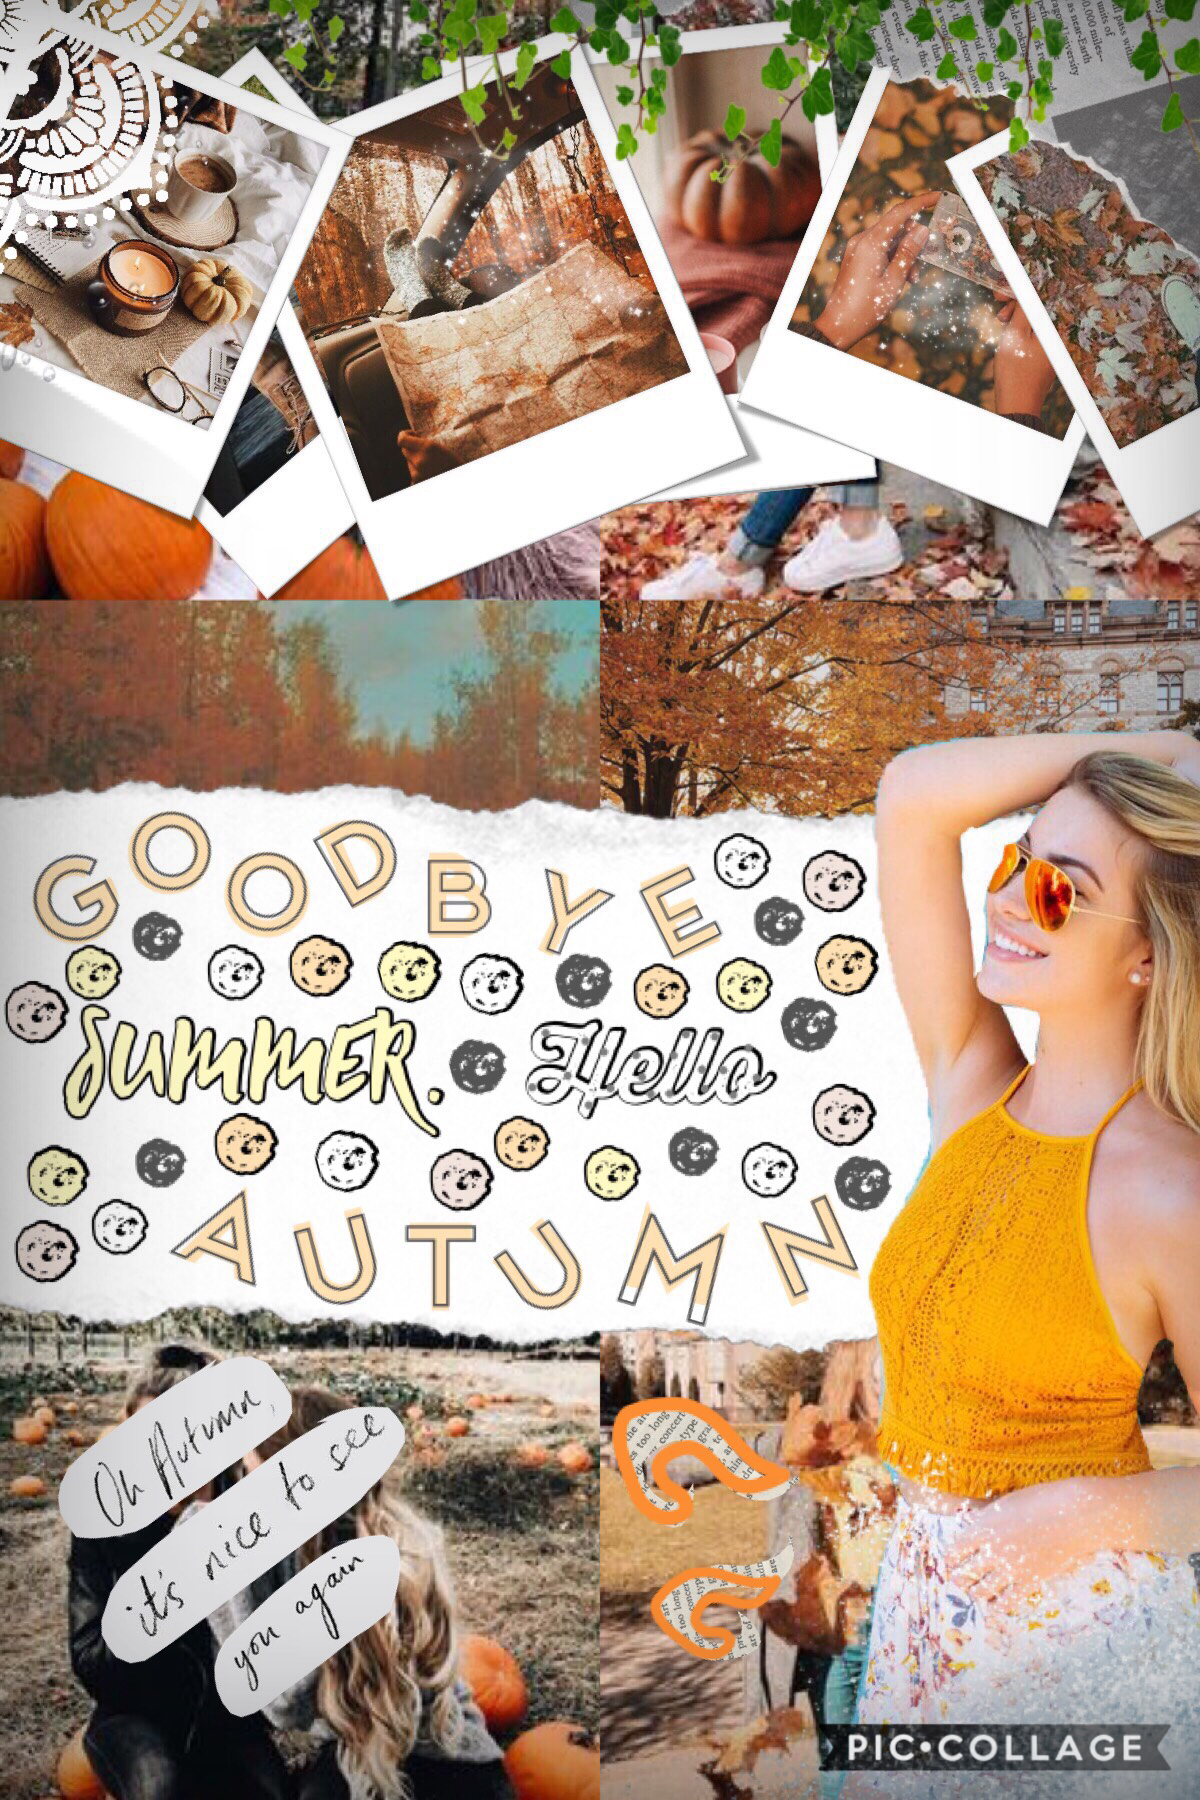 Hey! First Autumn themed collage 🍂 How’s life 🌿🌸 I HAVE SO MUCH HOMEWORK 😭